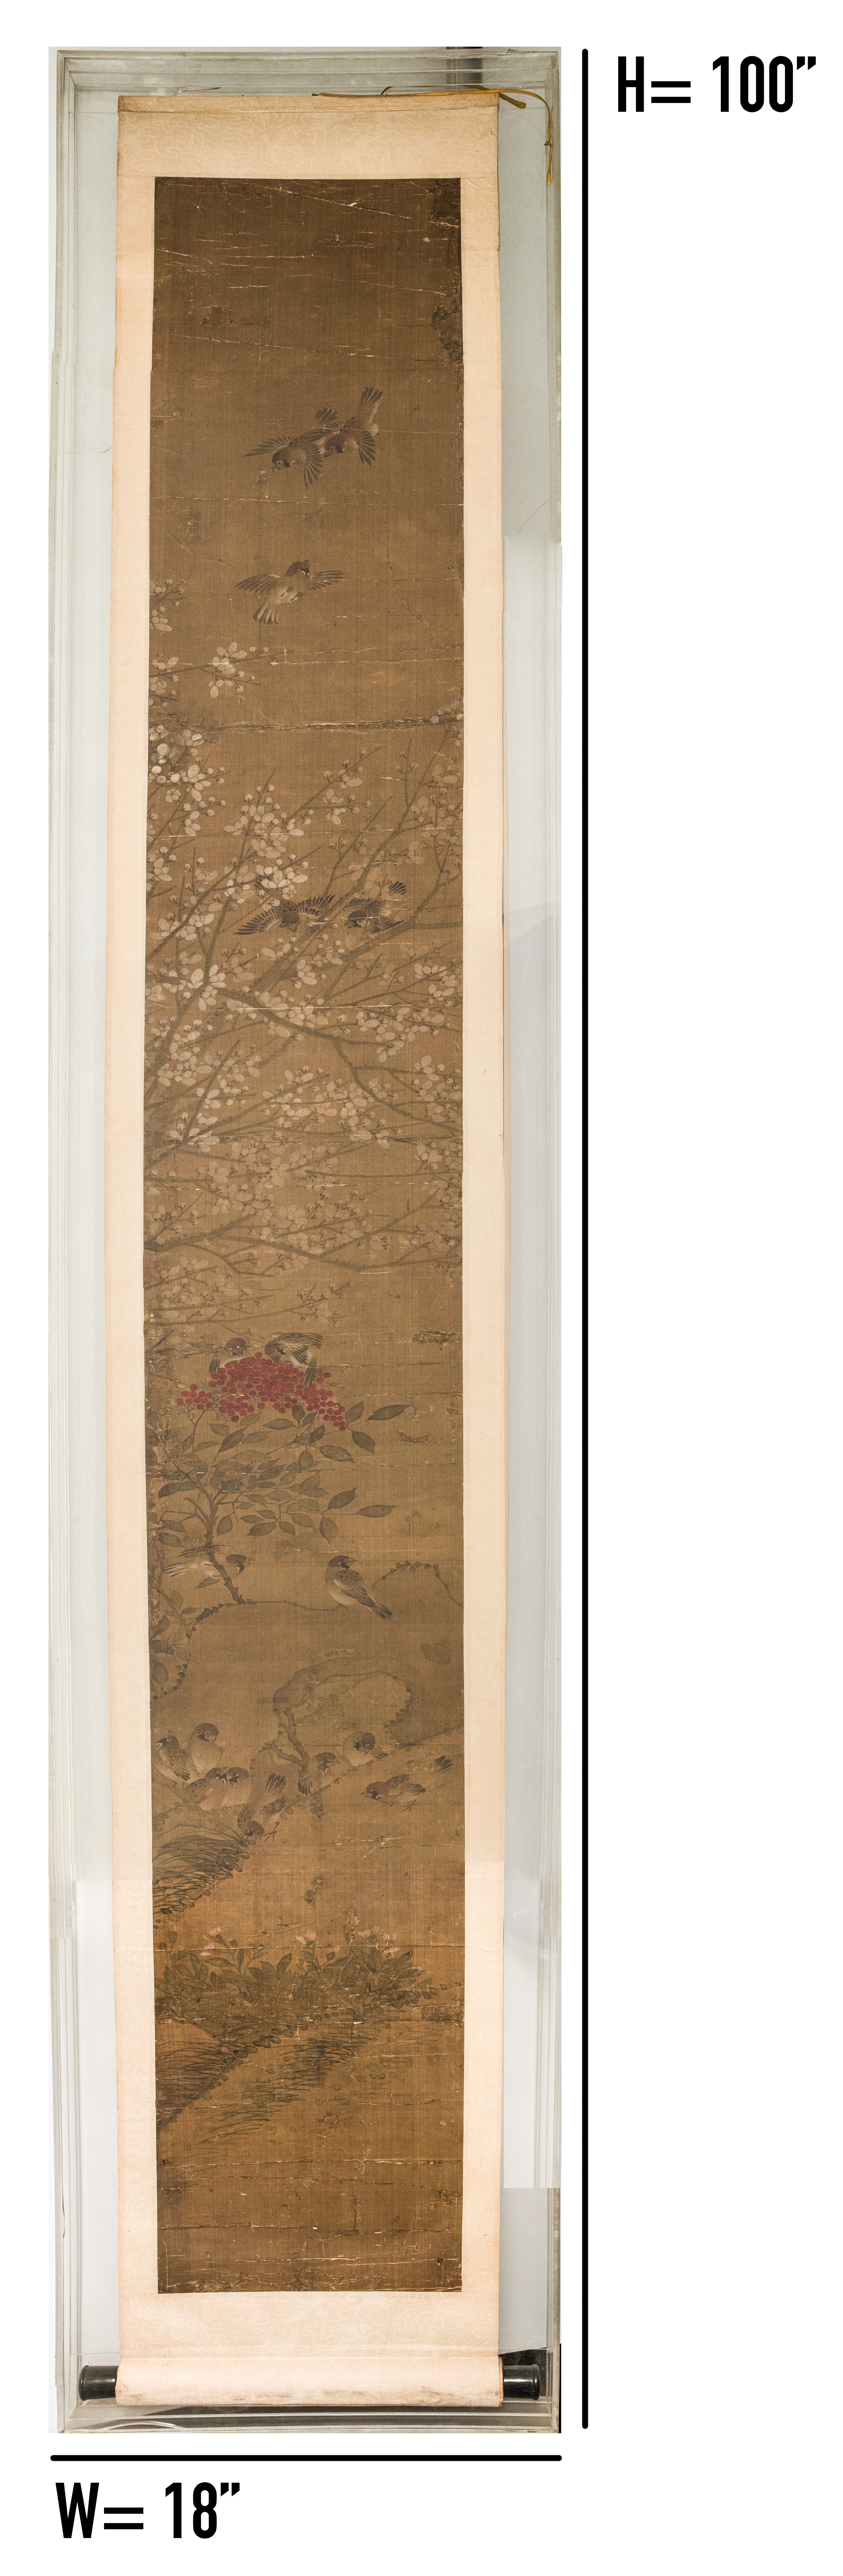 LARGE CHINESE BIRD AND FLOWER SCROLL 3634a1